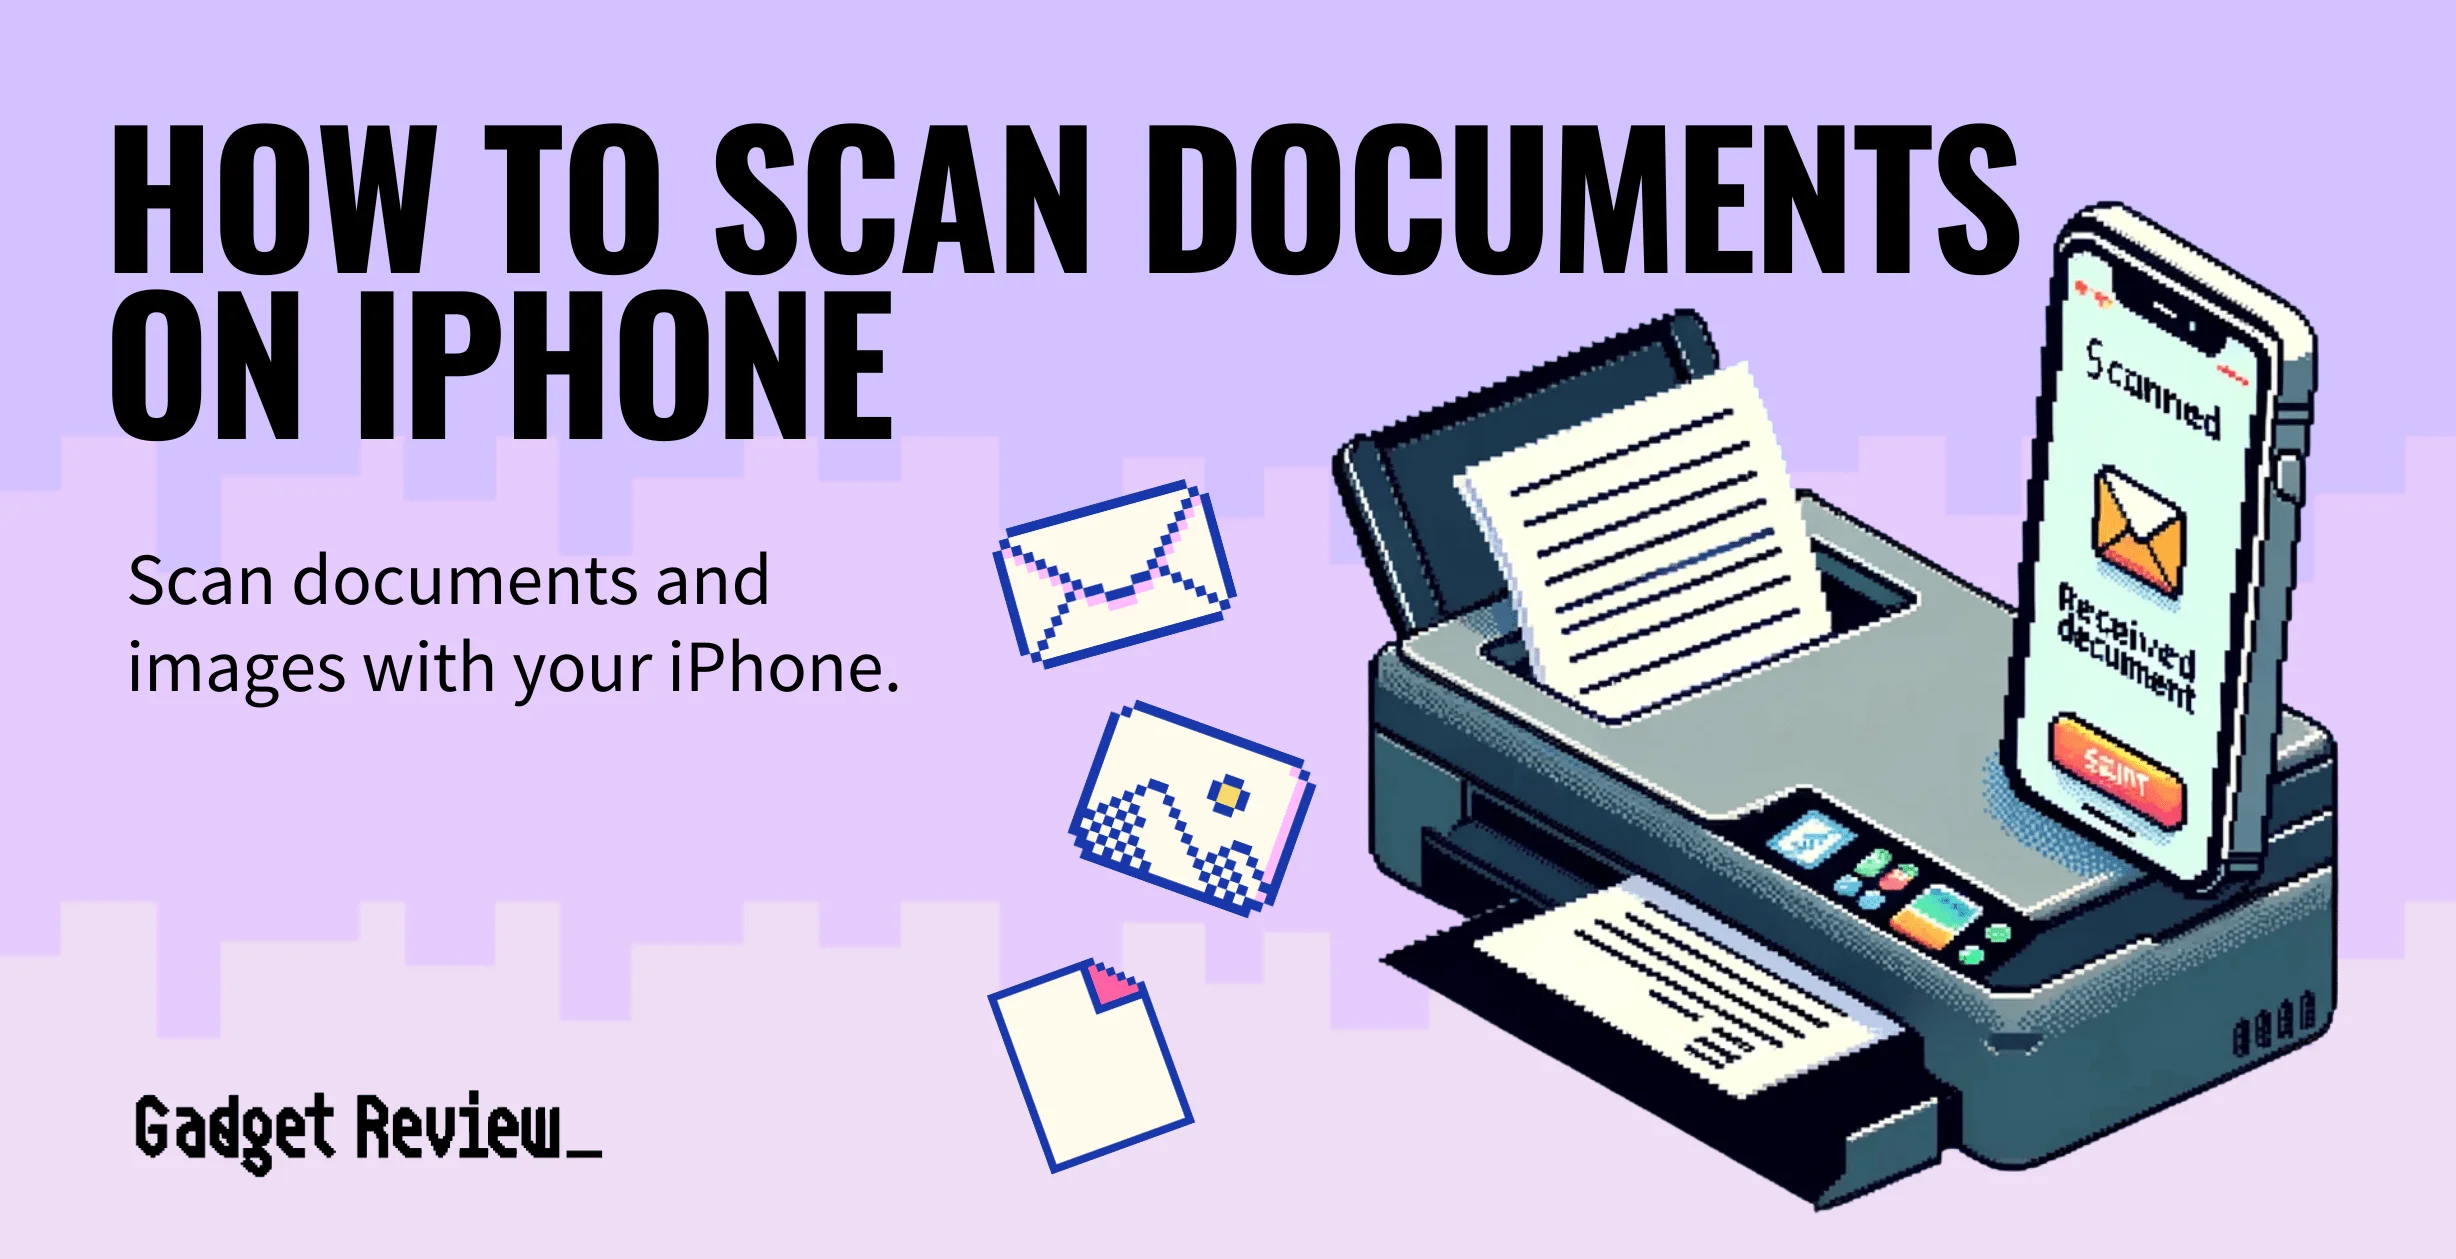 How to Scan Documents on iPhone